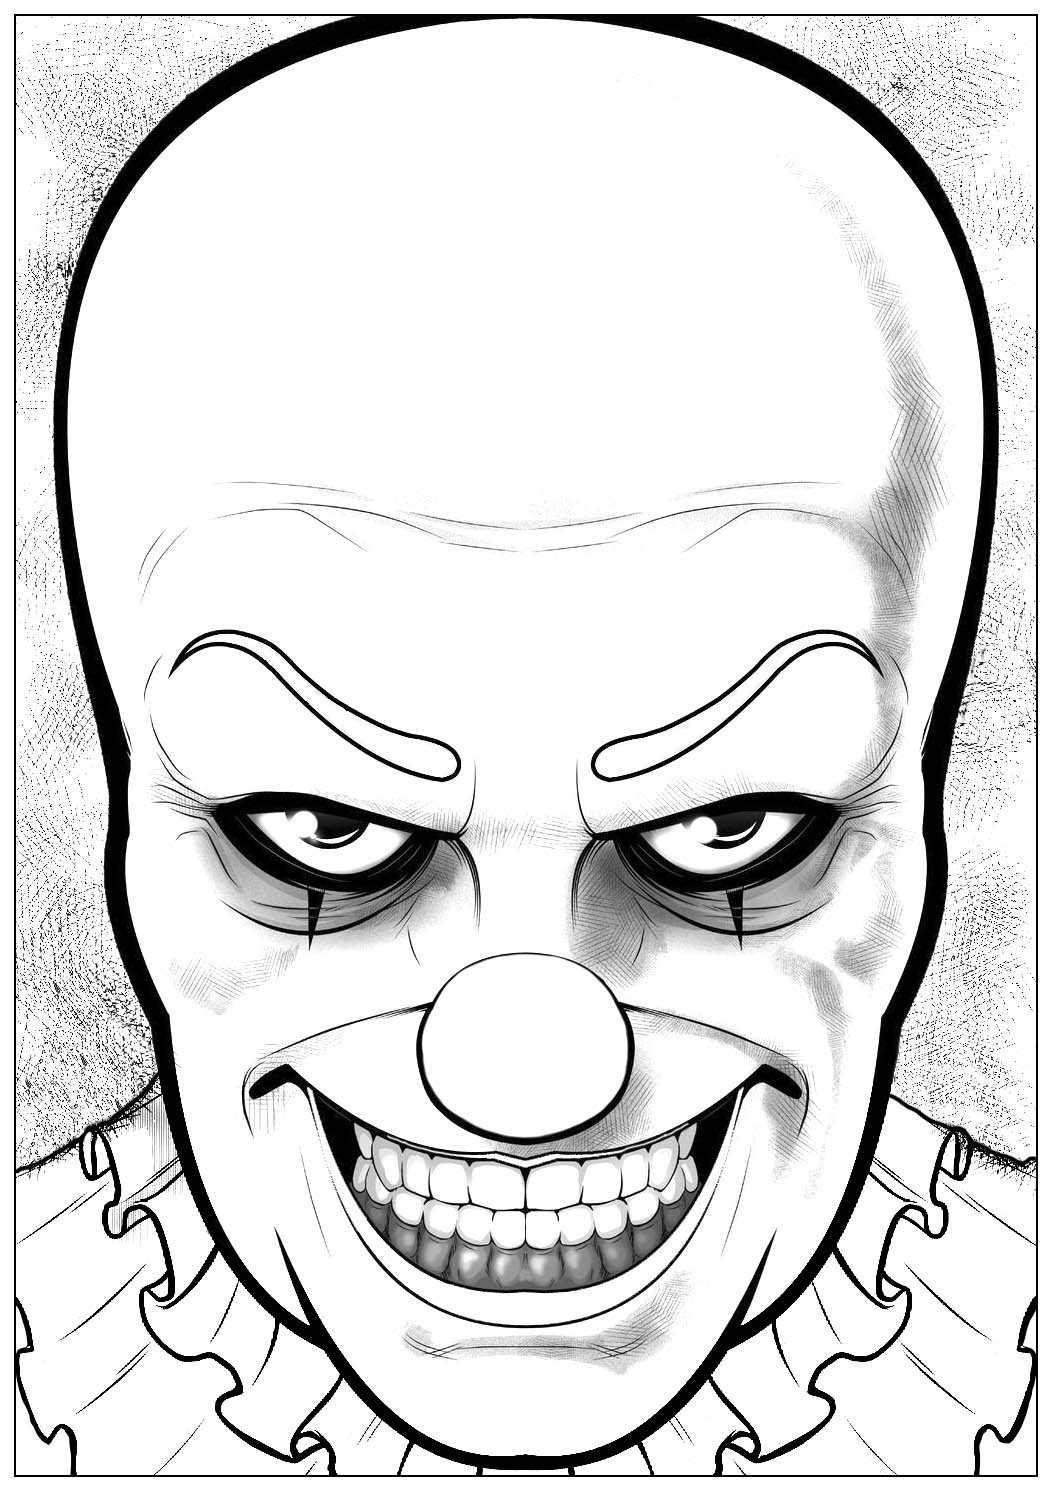 Halloween pennywise it - Halloween Adult Coloring Pages